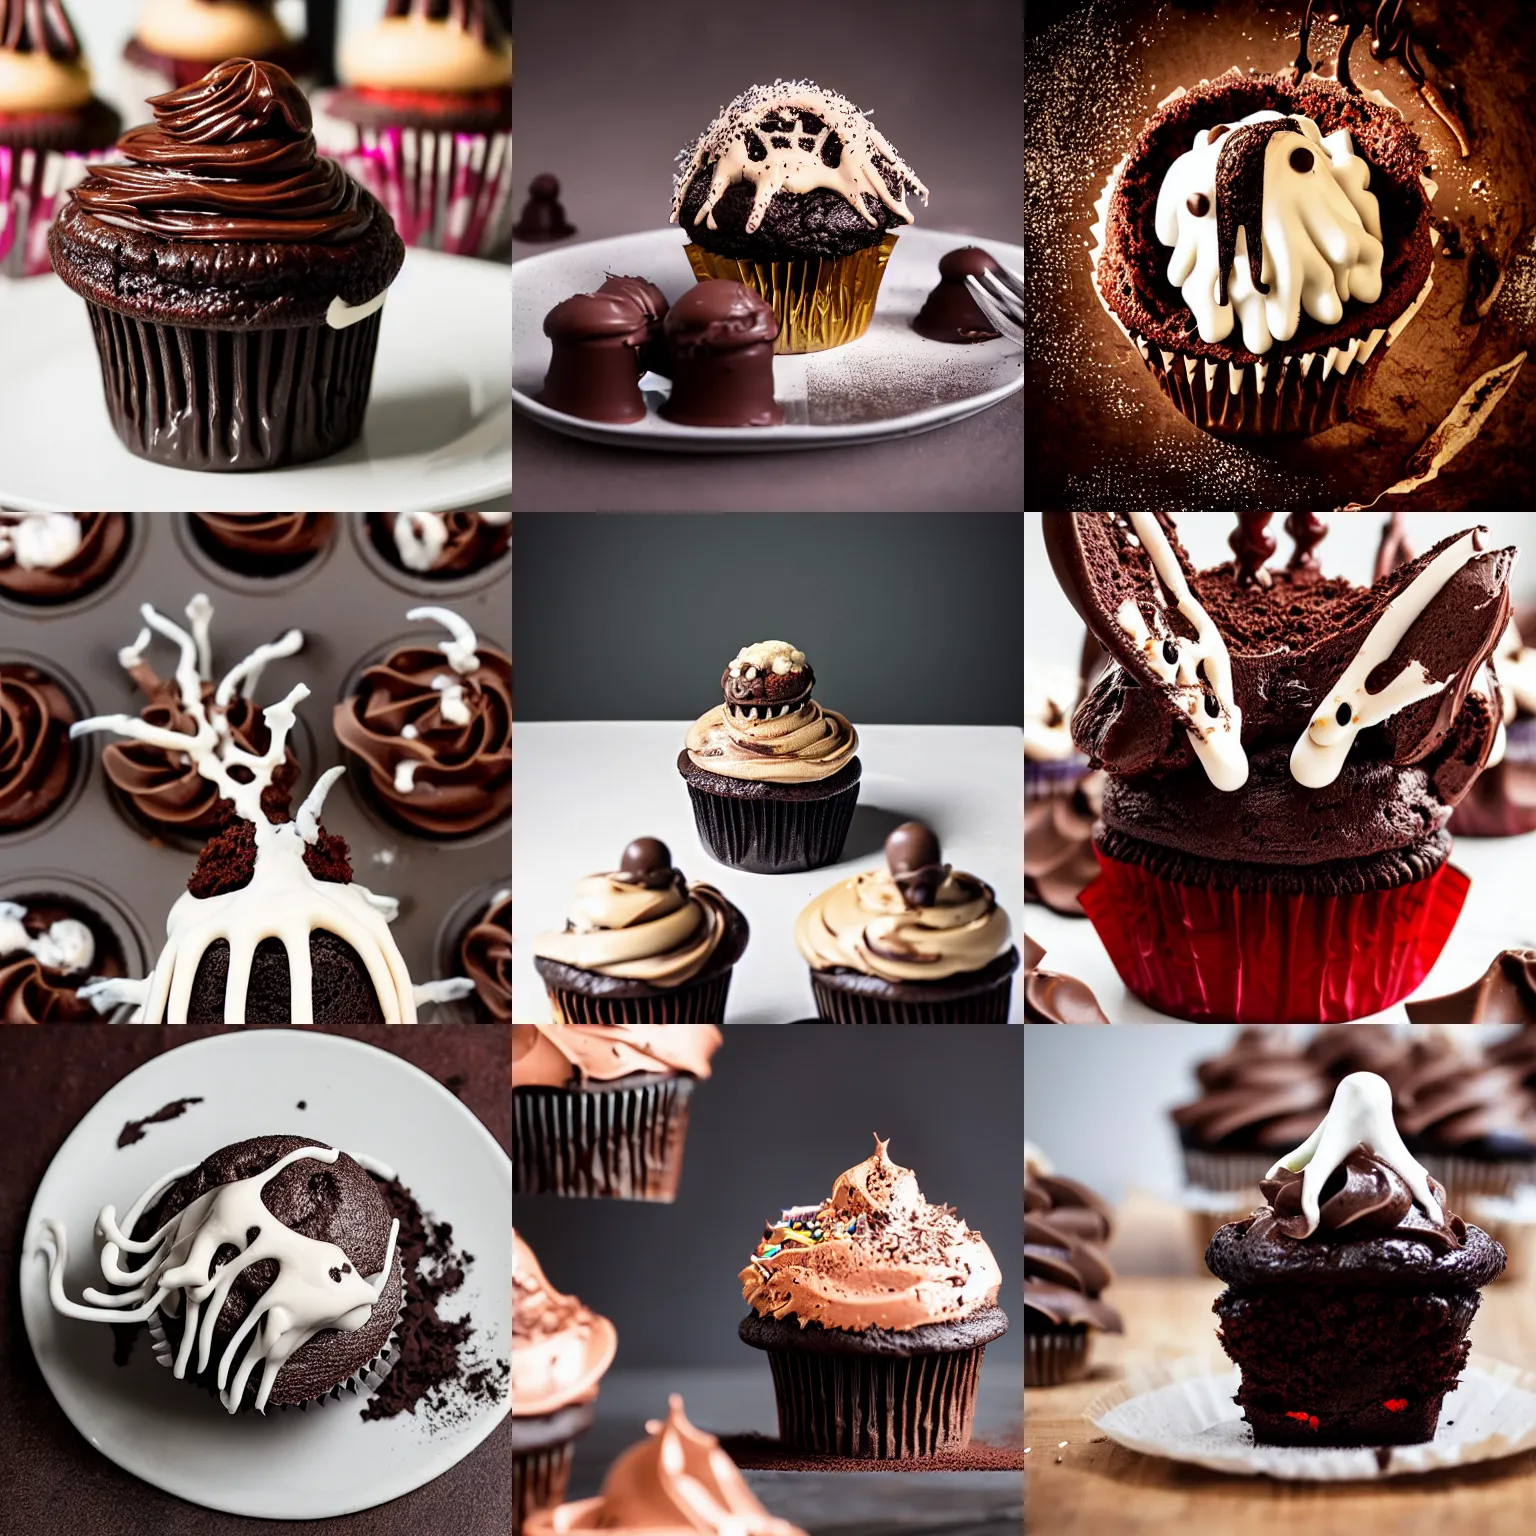 Prompt: a bone creature emerging from an exploding chocolate cupcake, eldritch, professional food photography